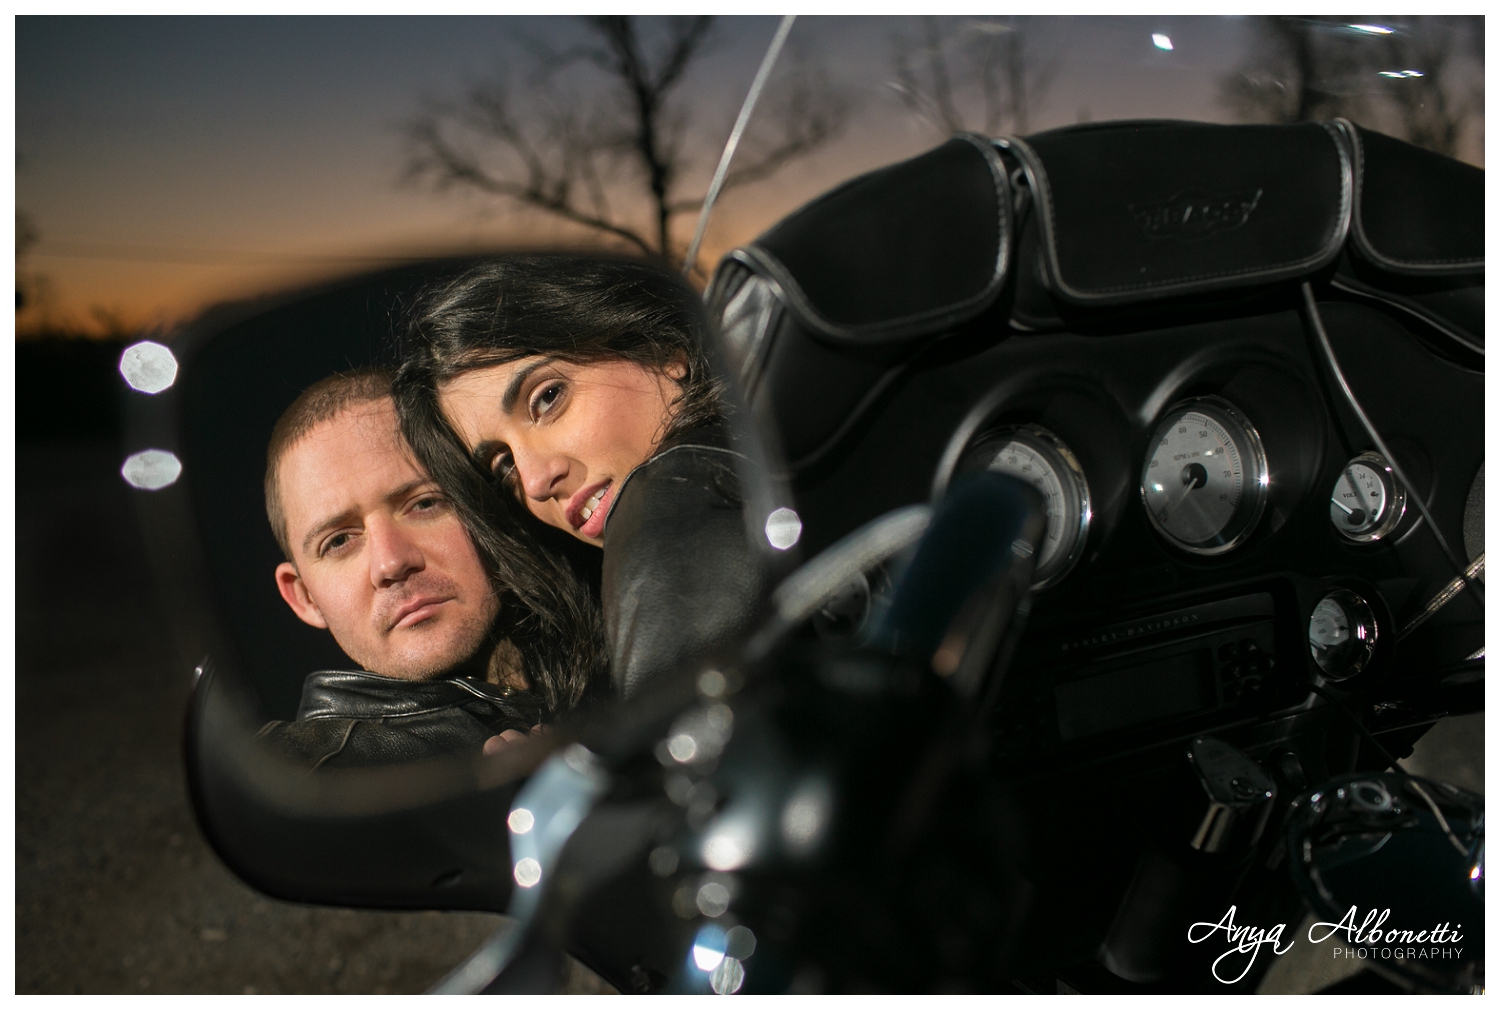 Motorcycle Engagement Photography